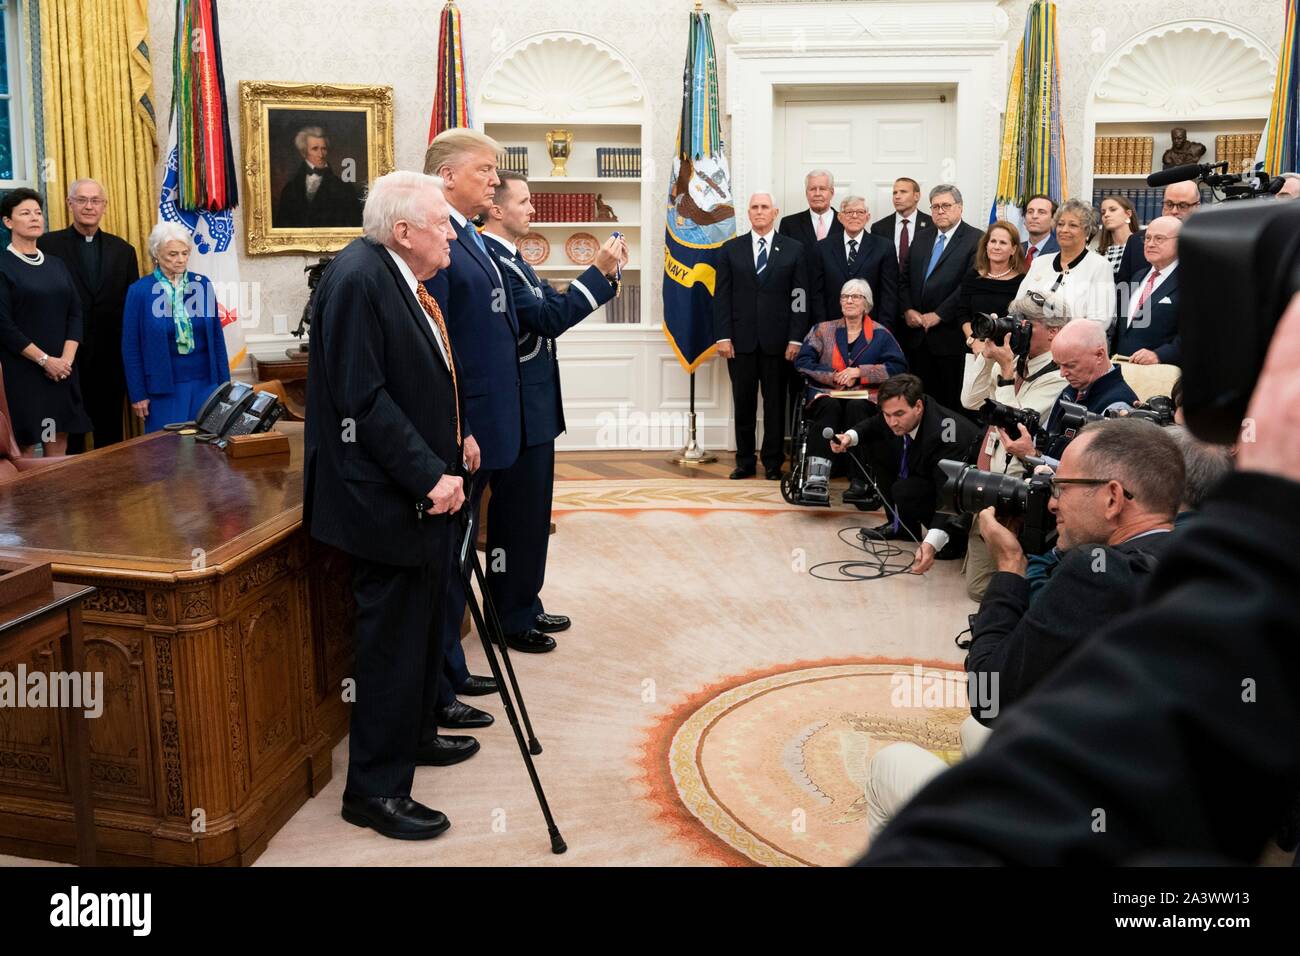 U.S President Donald Trump presents former Attorney General Edwin Meese, left, with the Presidential Medal of Freedom during a ceremony in the Oval Office of the White House October 8, 2019 in Washington, DC. Stock Photo